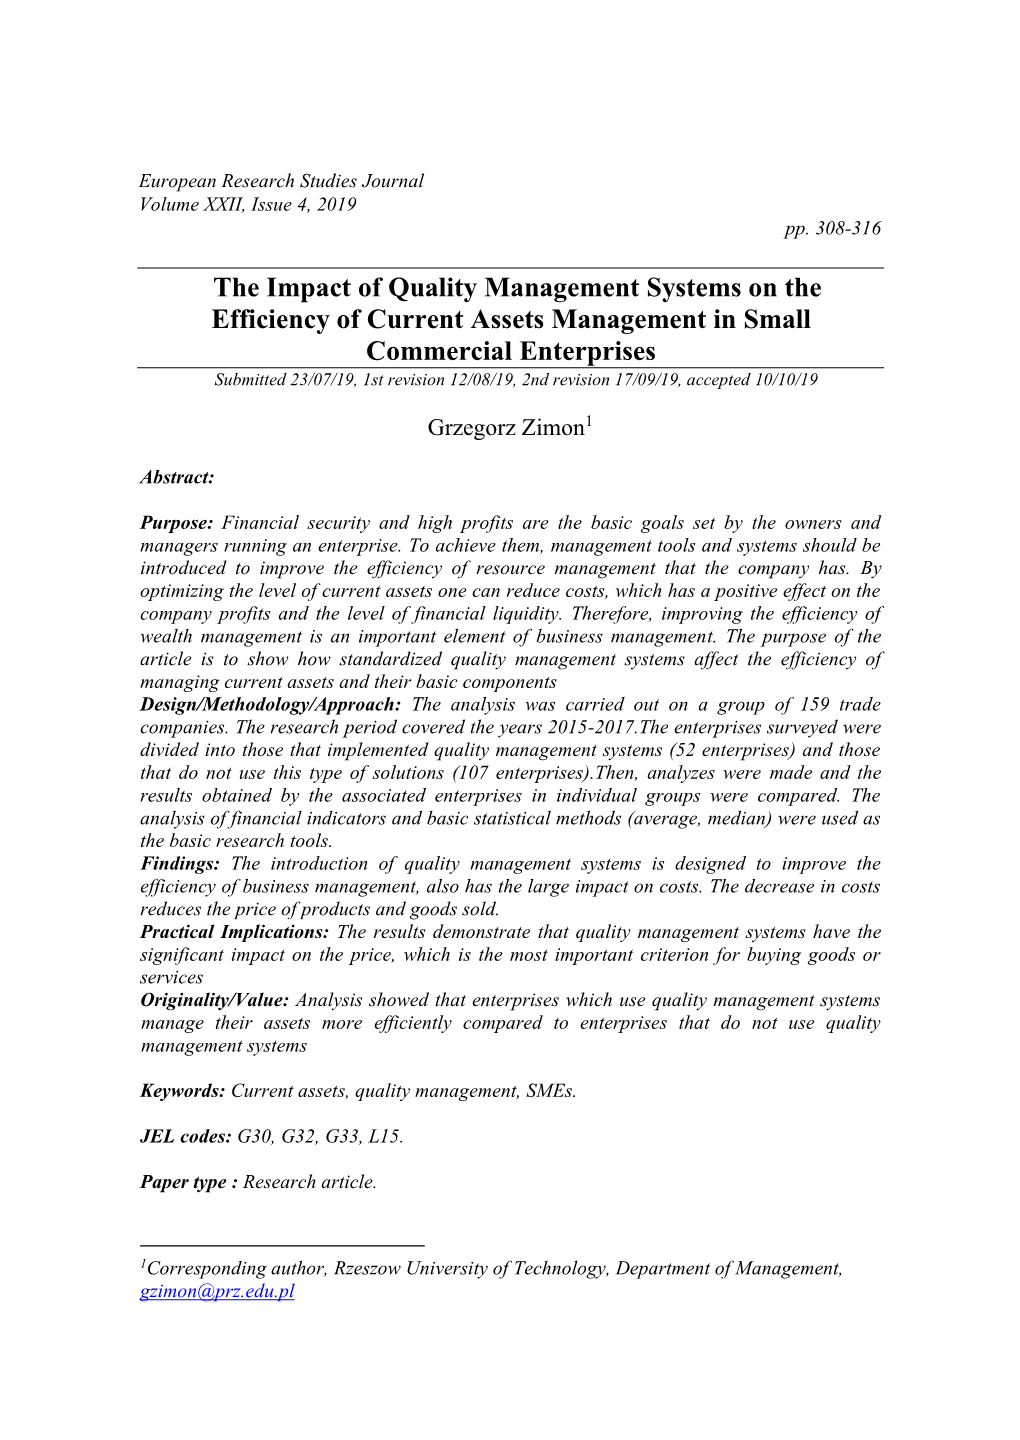 The Impact of Quality Management Systems on the Efficiency of Current